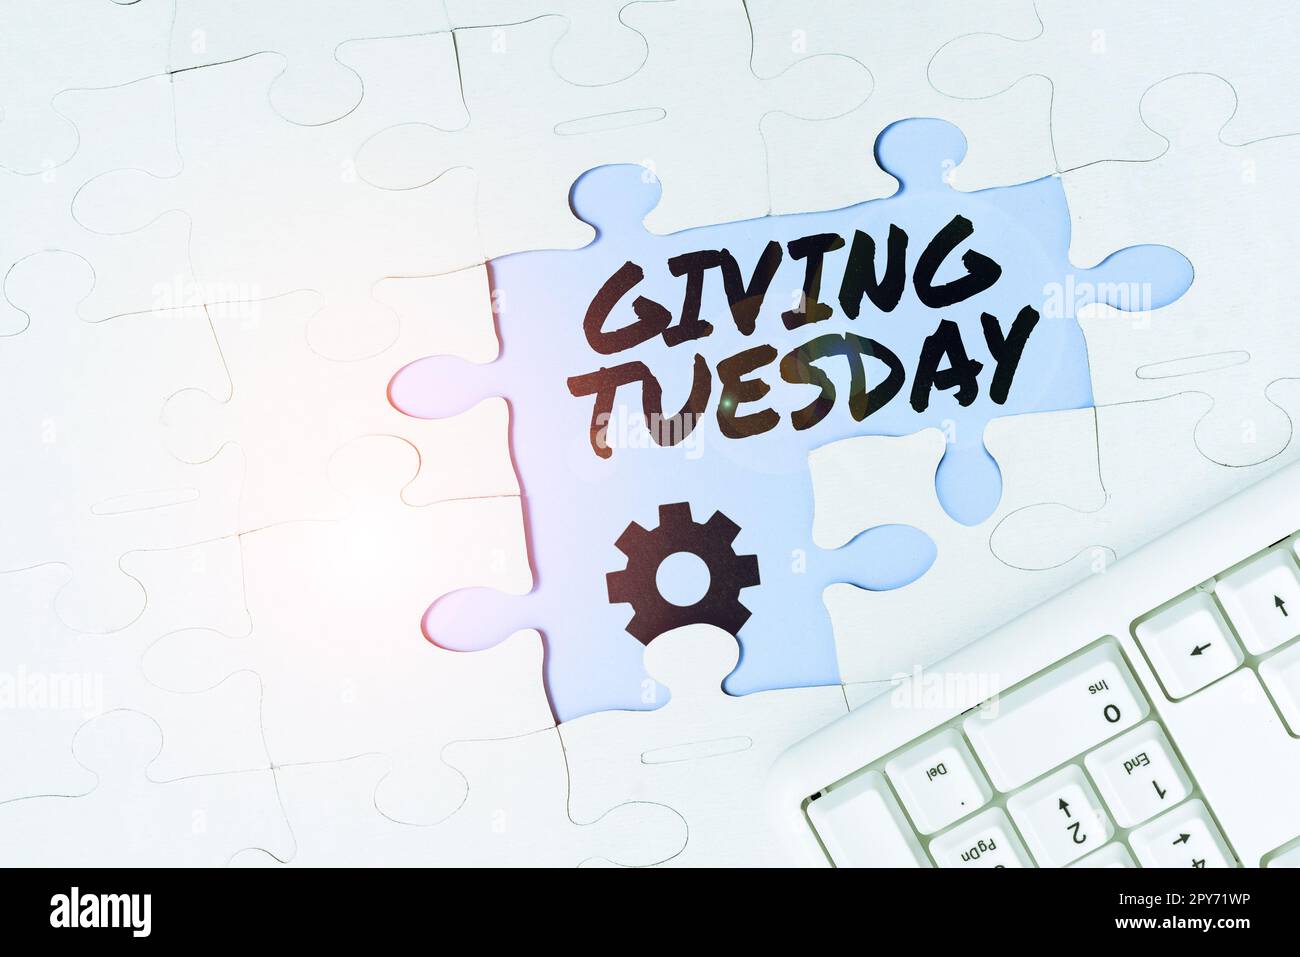 Inspiration showing sign Giving Tuesday. Business approach international day of charitable giving Hashtag activism Stock Photo